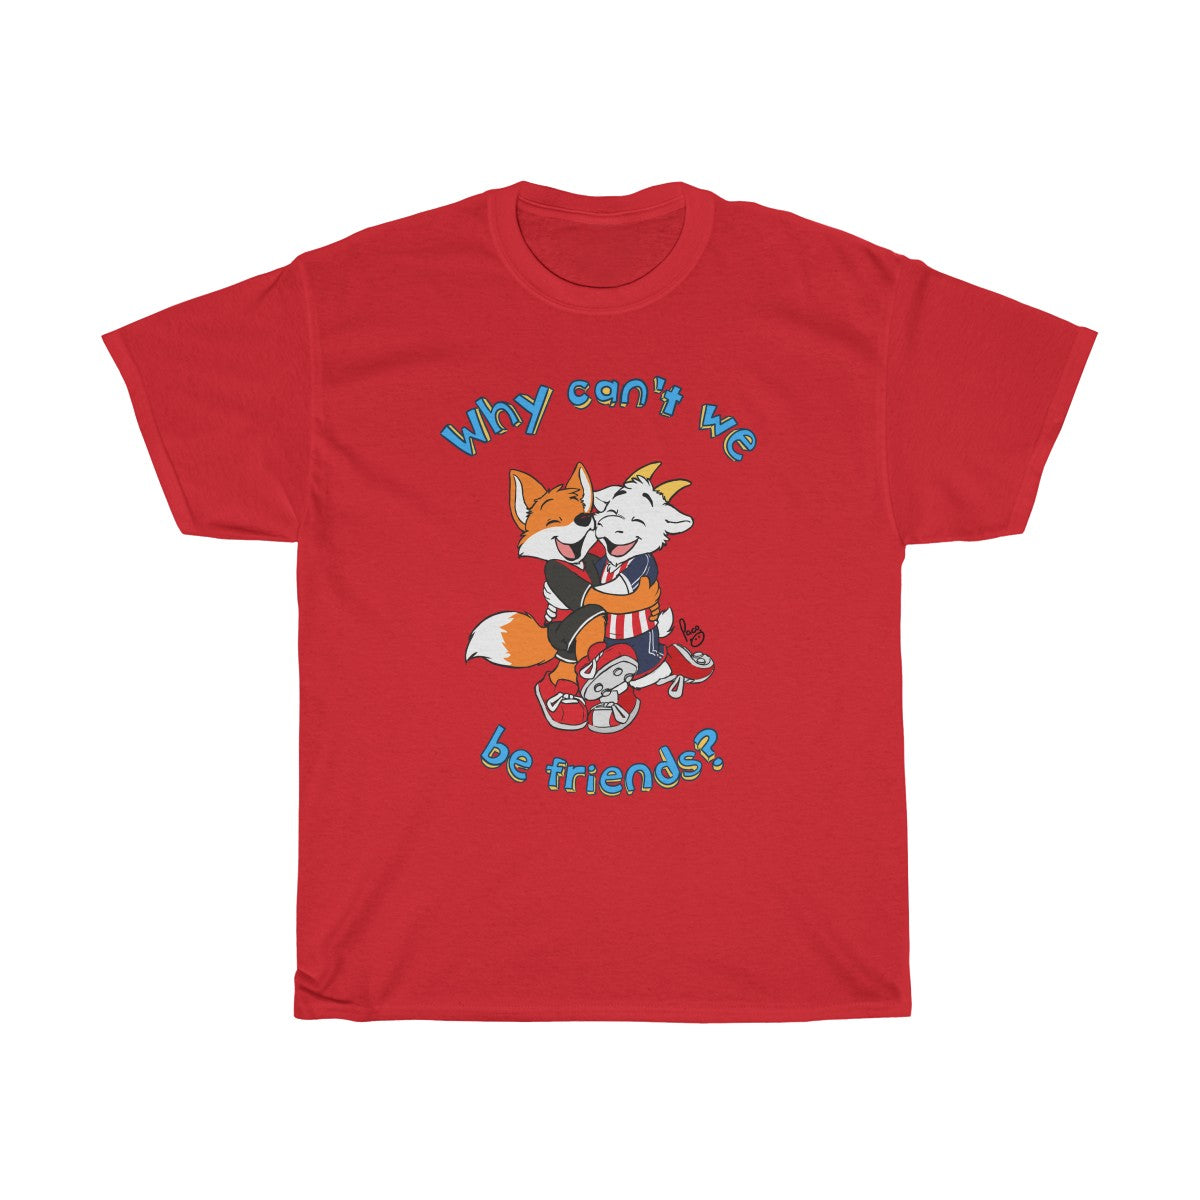 Why Can't we be Friends 2? - T-Shirt T-Shirt Paco Panda Red S 